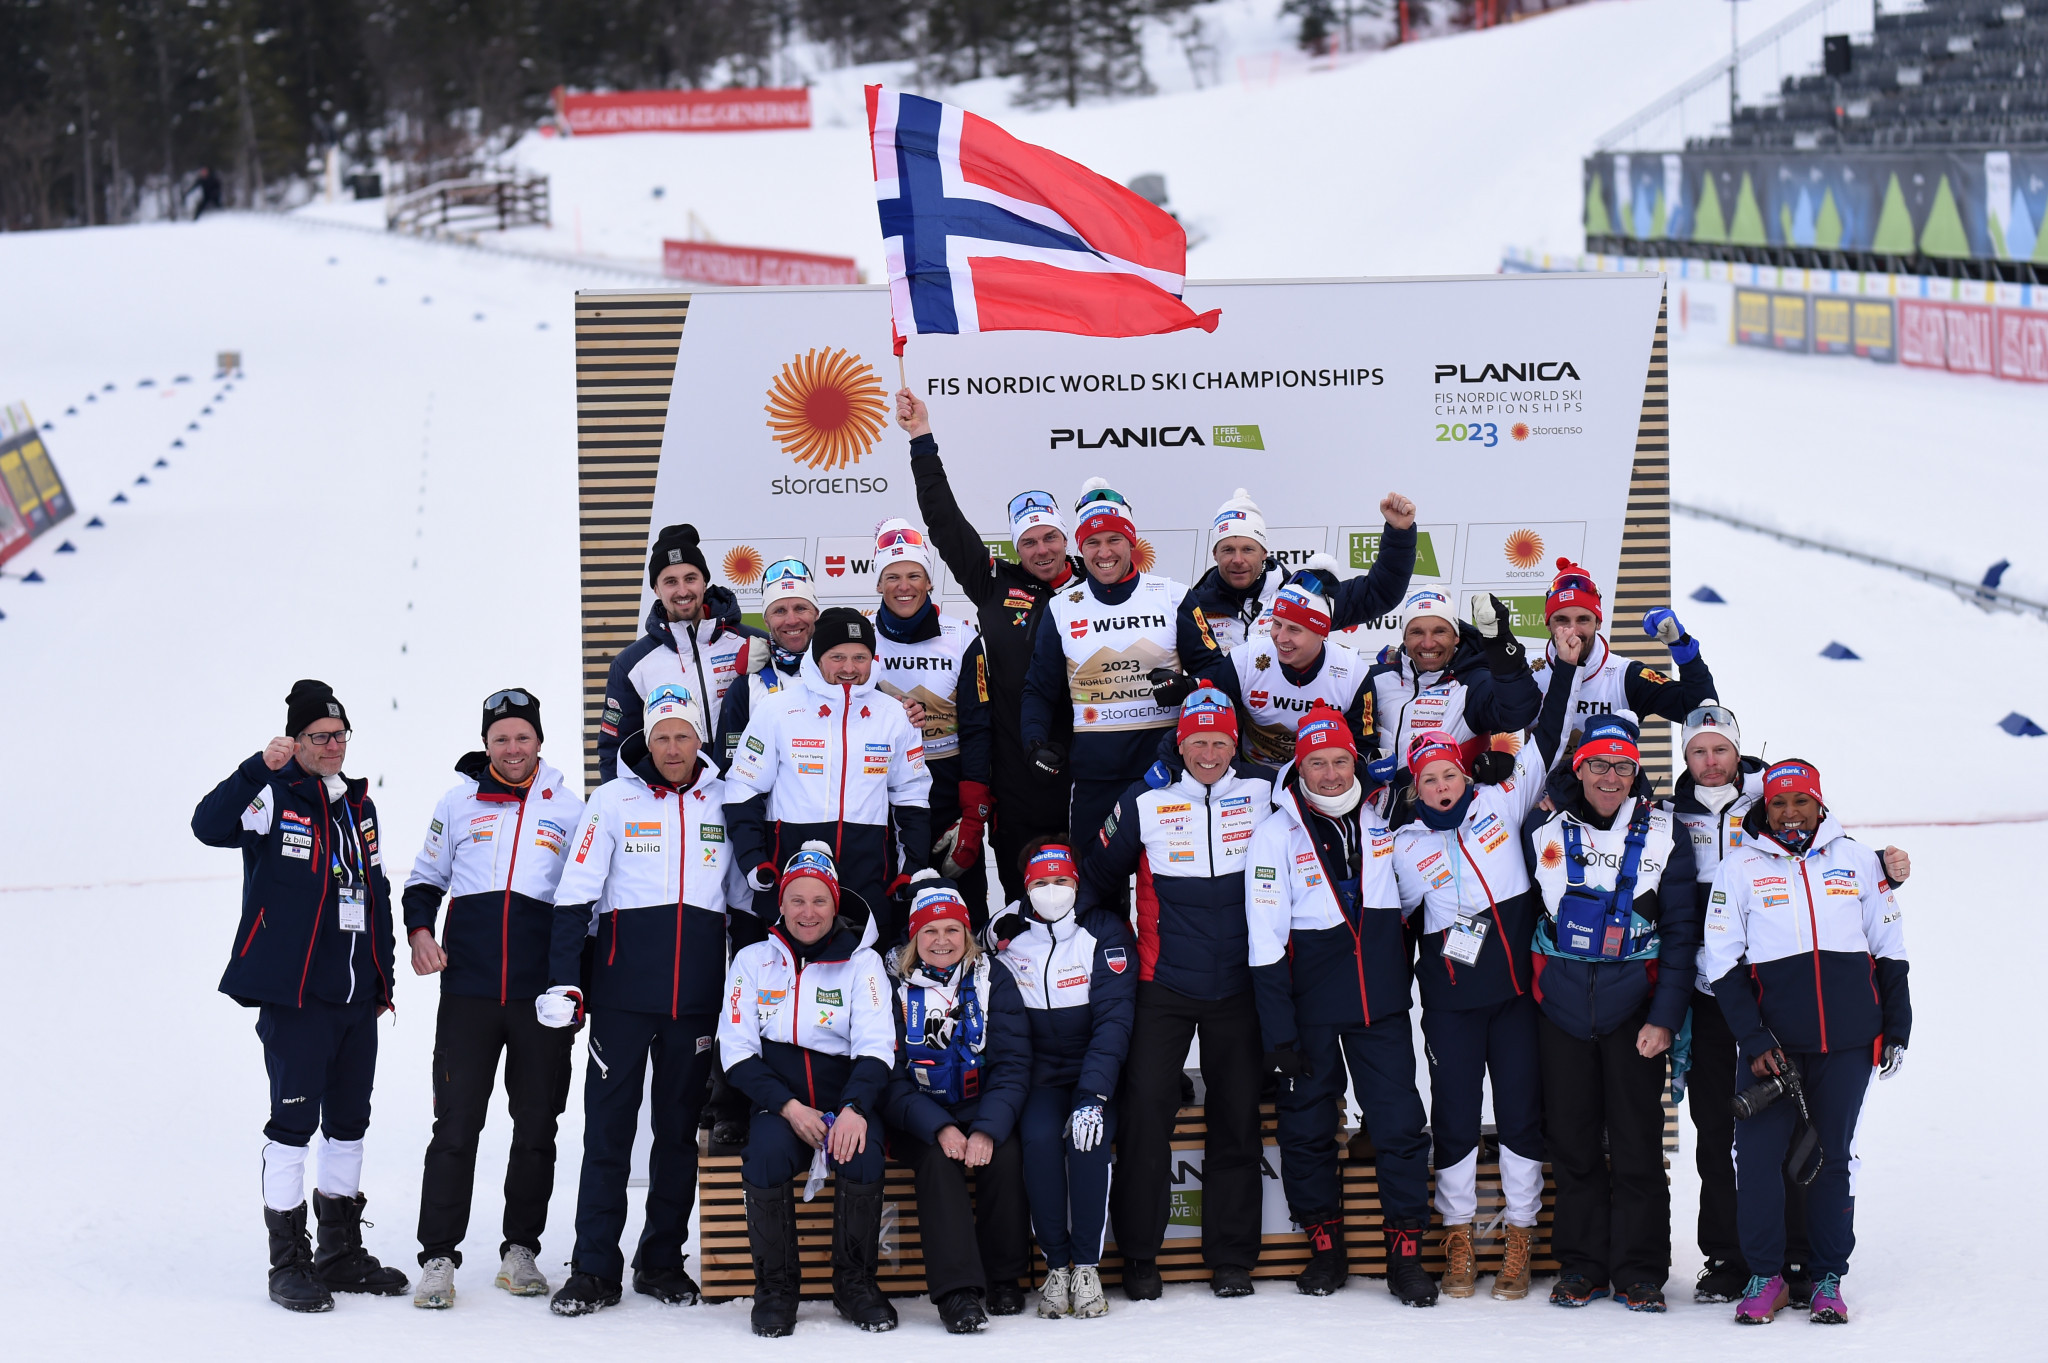 Norway win men's 4x10 km relay title at Nordic World Ski Championships in Planica